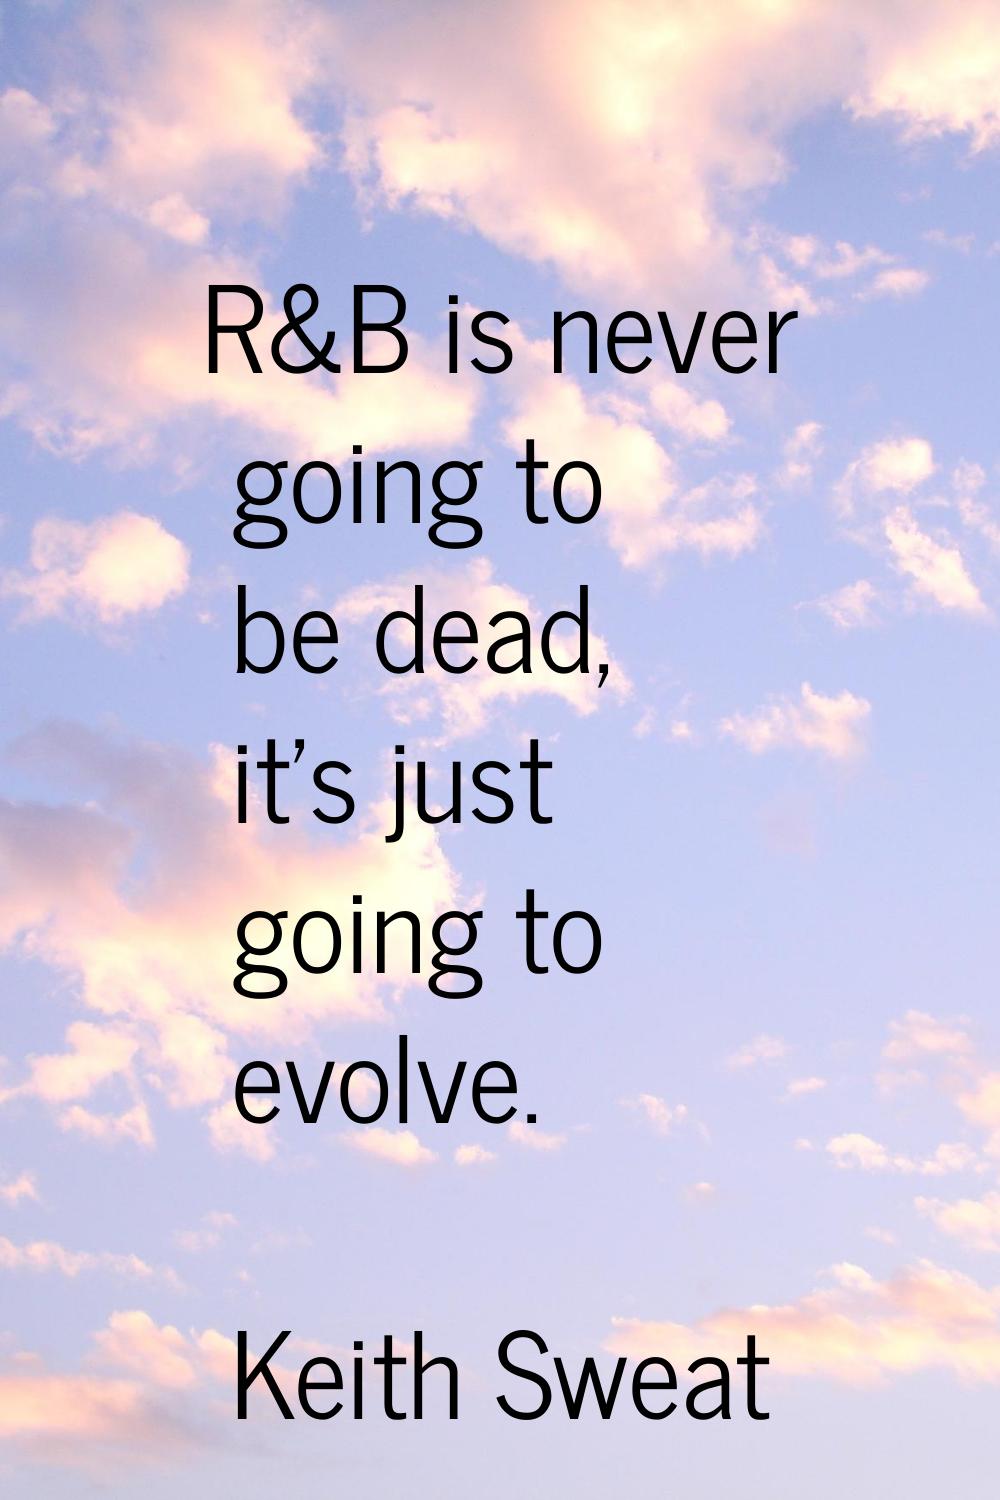 R&B is never going to be dead, it's just going to evolve.